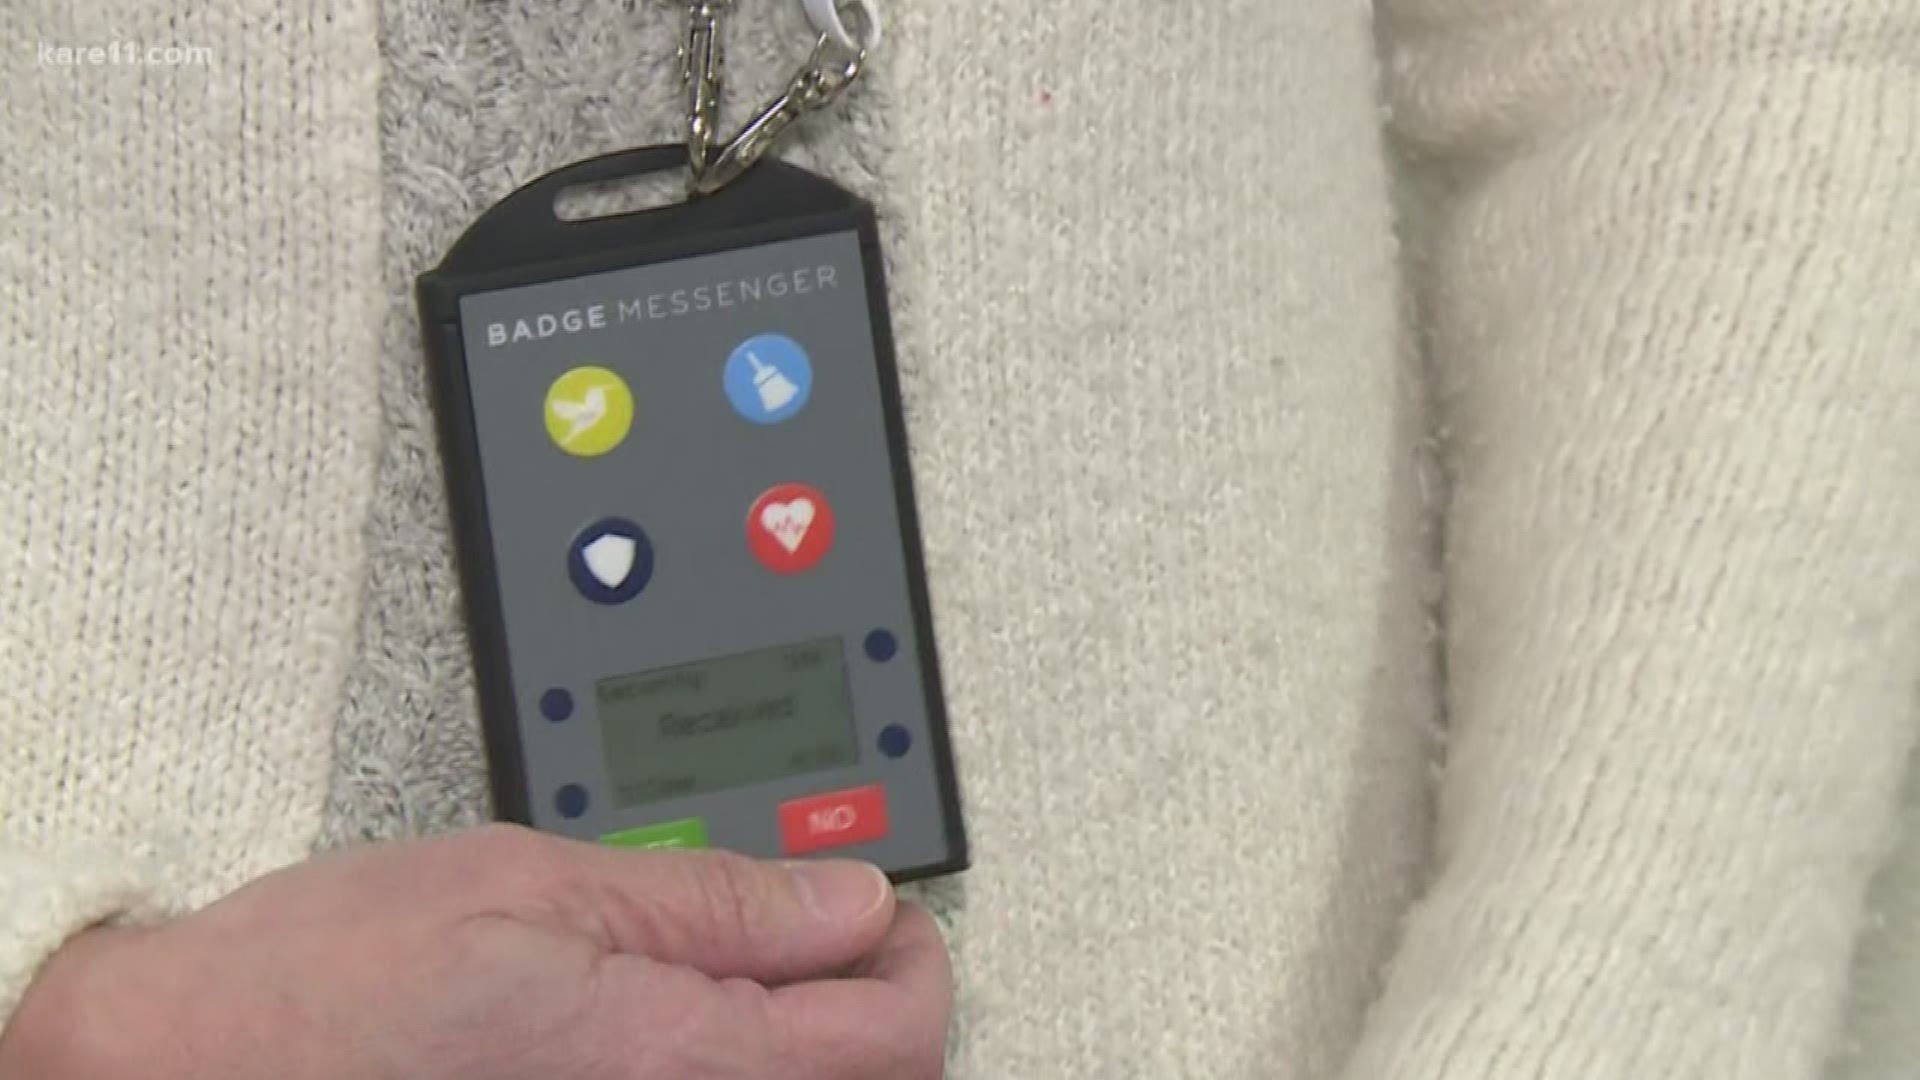 A school in central Minnesota is the first in the country to try a new system aimed at helping keep students safe. BadgeMessenger is a pilot program at St. Francis Xavier Catholic School in Sartell. https://kare11.tv/2XdnBA0